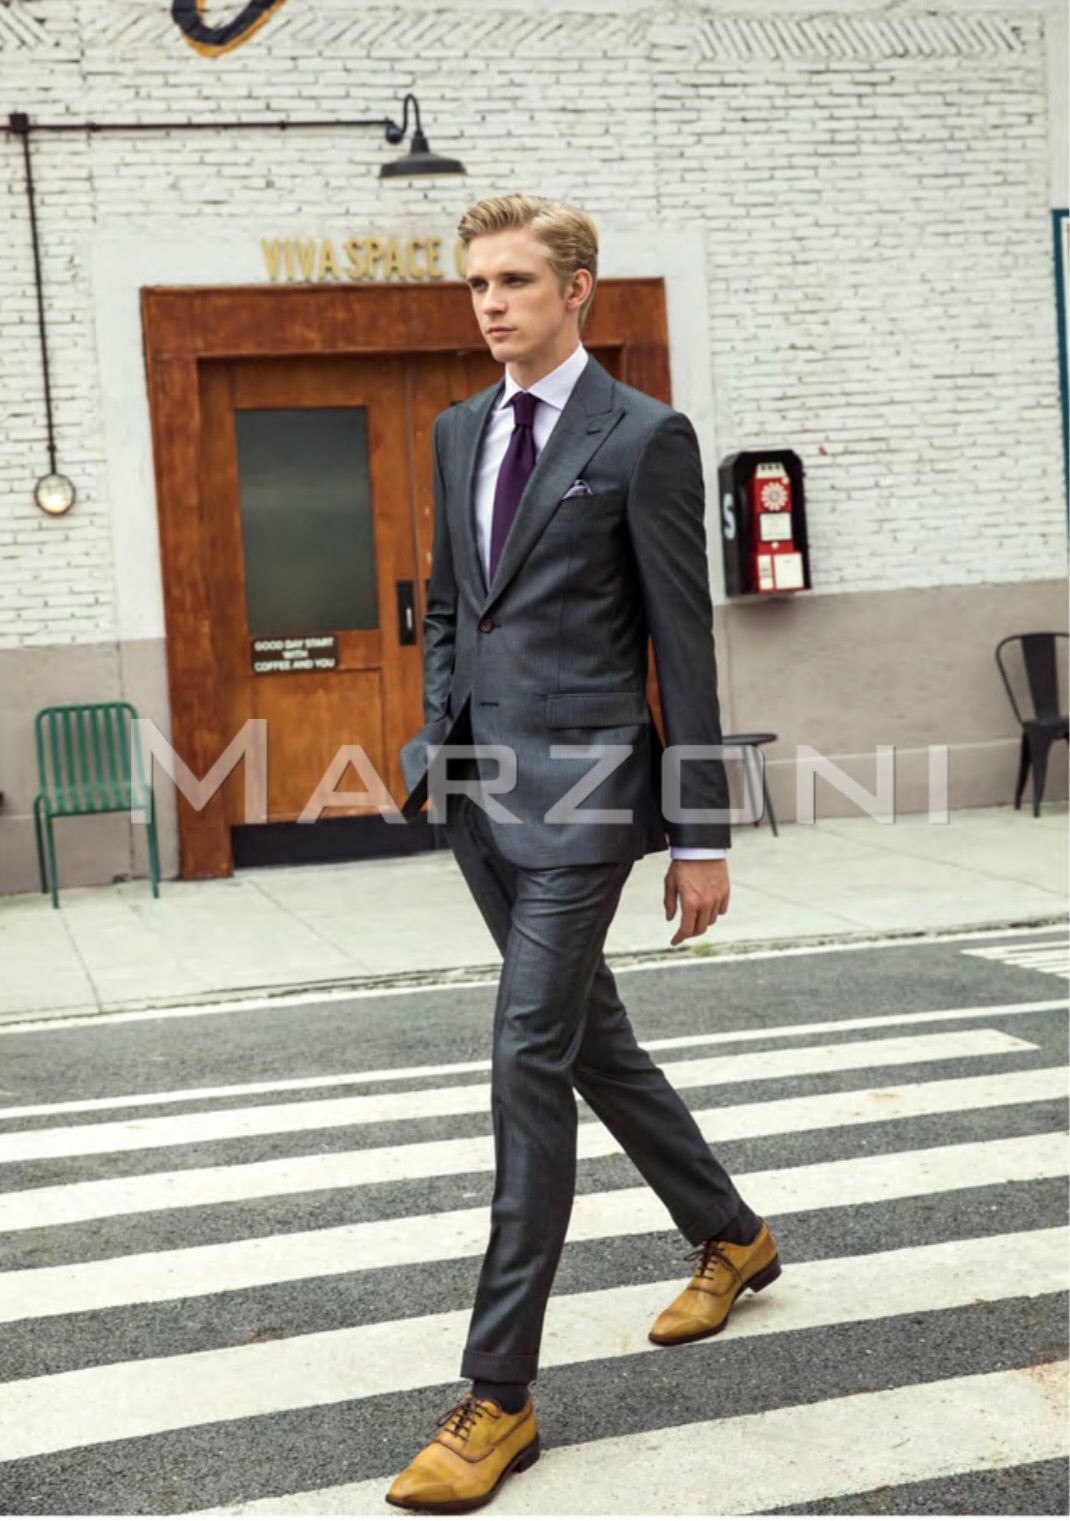 Marzoni Charcoal and White Suit